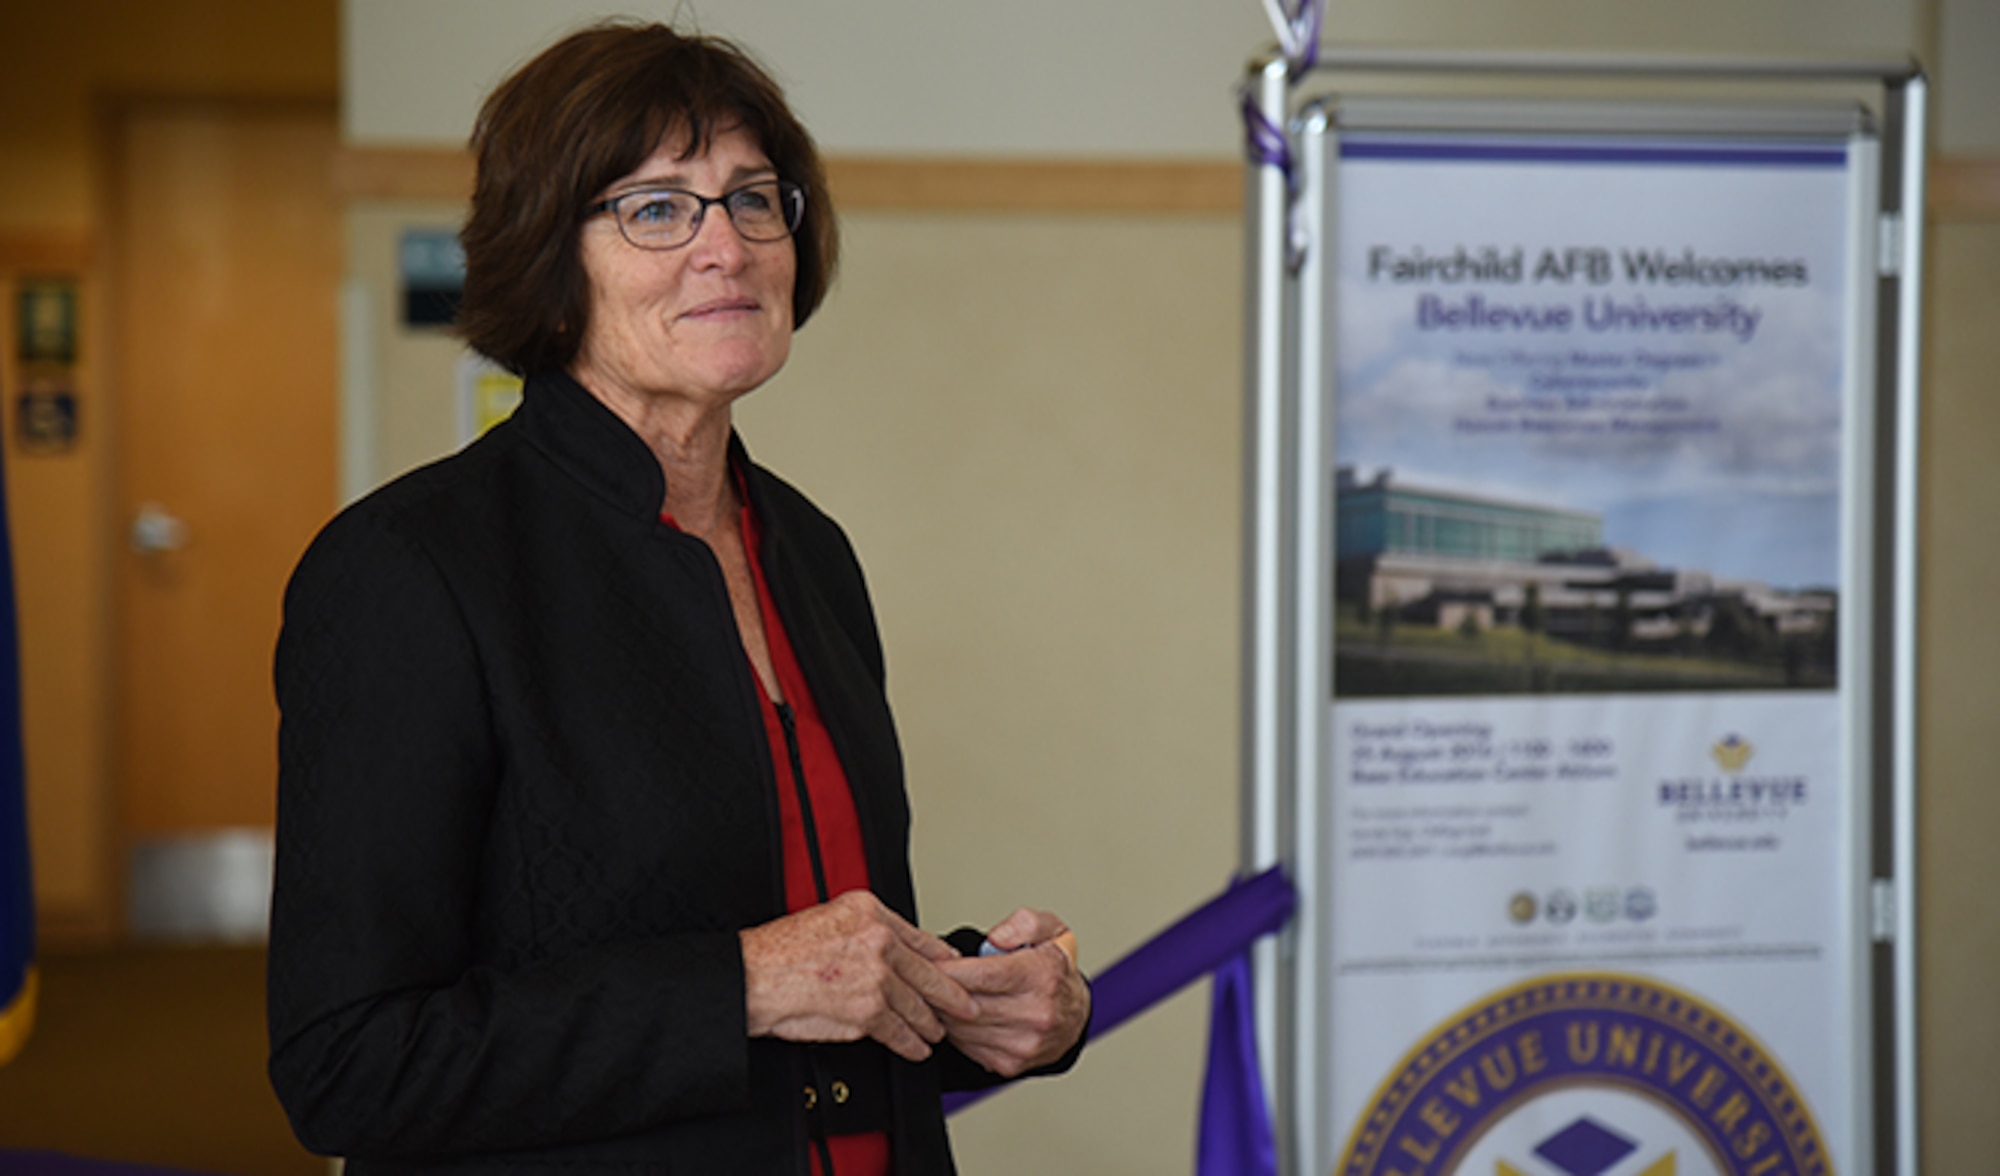 Dr. Mary Hawkins, Bellevue University president, reflects about her time as a military spouse during the ribbon-cutting ceremony for Bellevue University Aug. 25, 2016, at Fairchild Air Force Base. Since Hawkins joined the institution in 1995, Bellevue University enrollment has experienced record growth and has been consistently ranked as one of the nation’s best online learning and military-friendly institutions. (U.S. Air Force photo/Airman 1st Class Mackenzie Richardson)